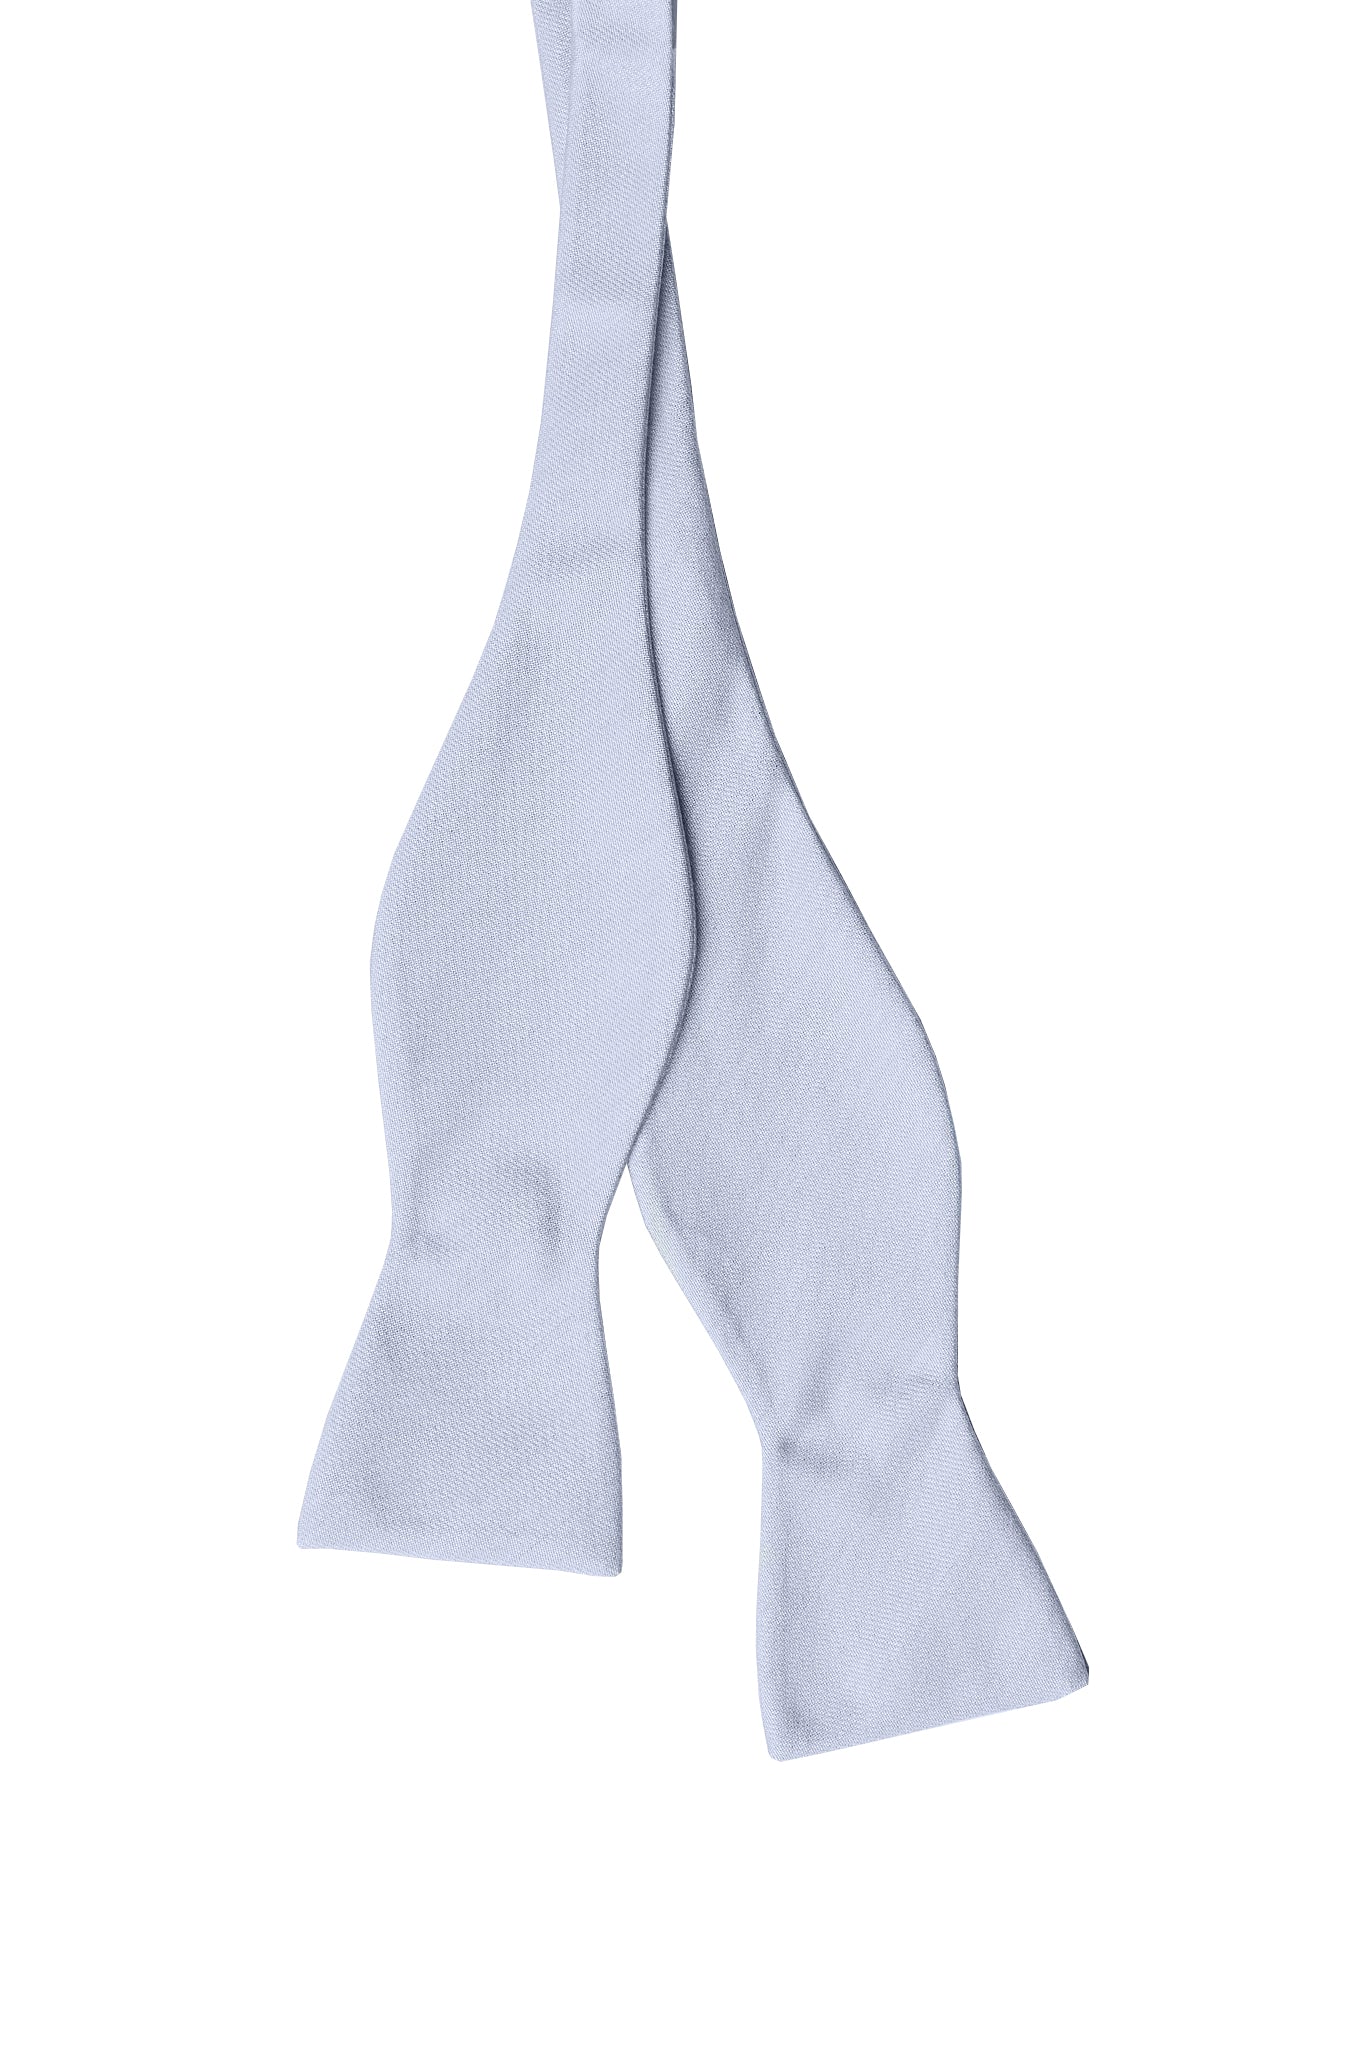 Daniel Bow Tie in ice blue by Birdy Grey, front view